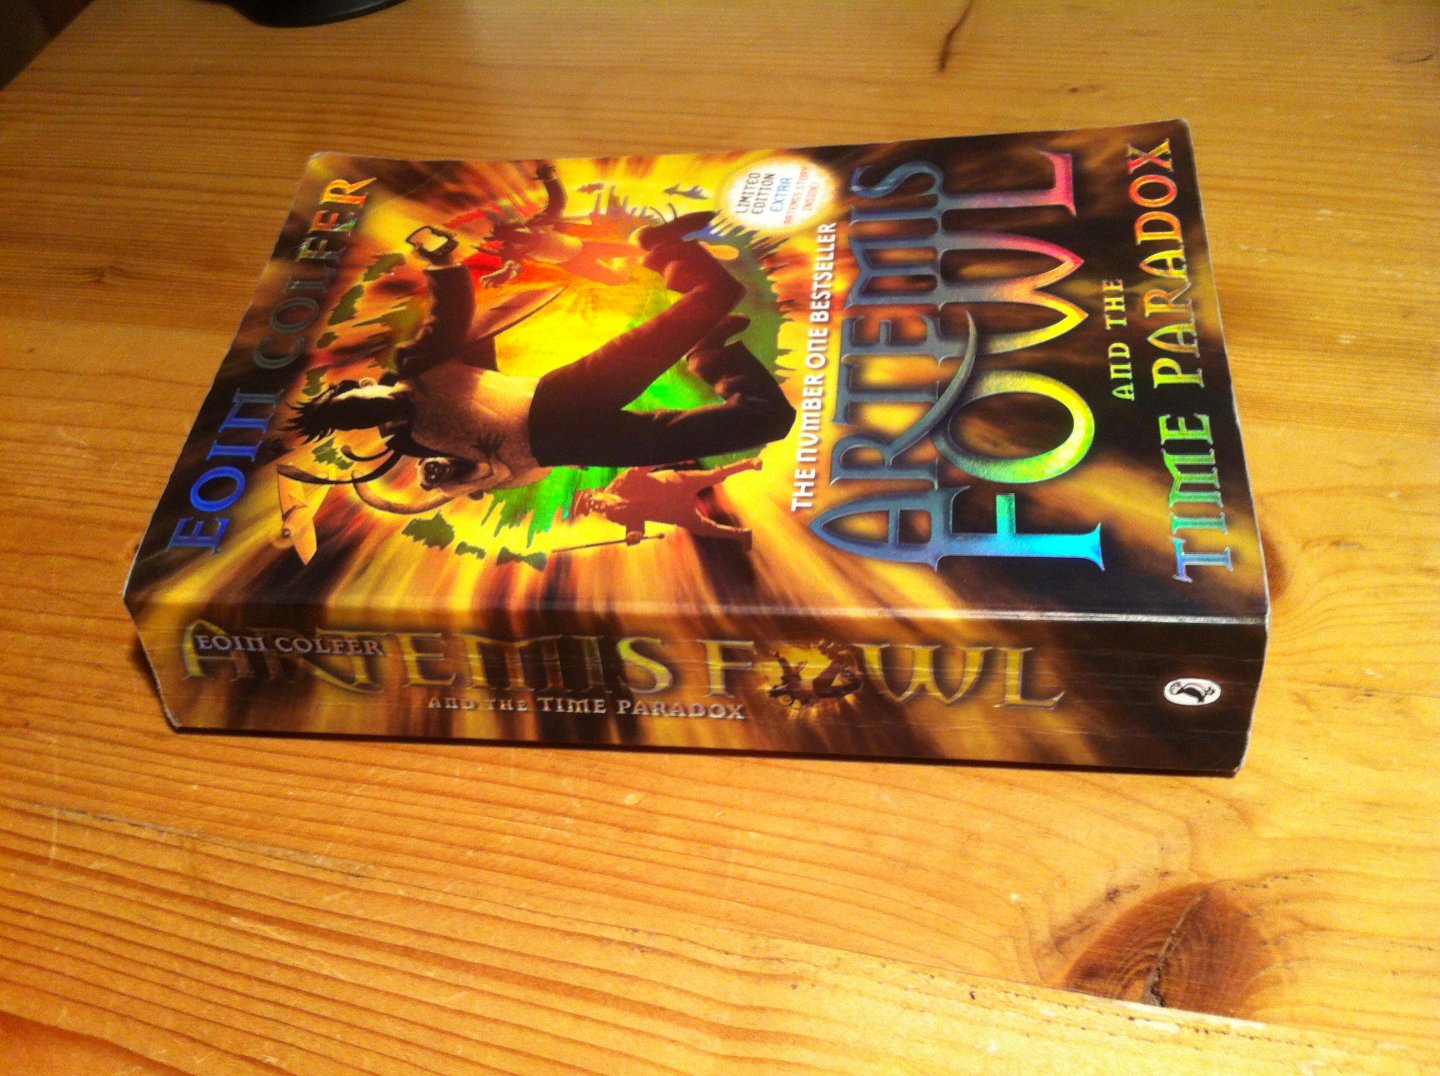 Colfer, Eoin - Artemis Fowl and the Time Paradox